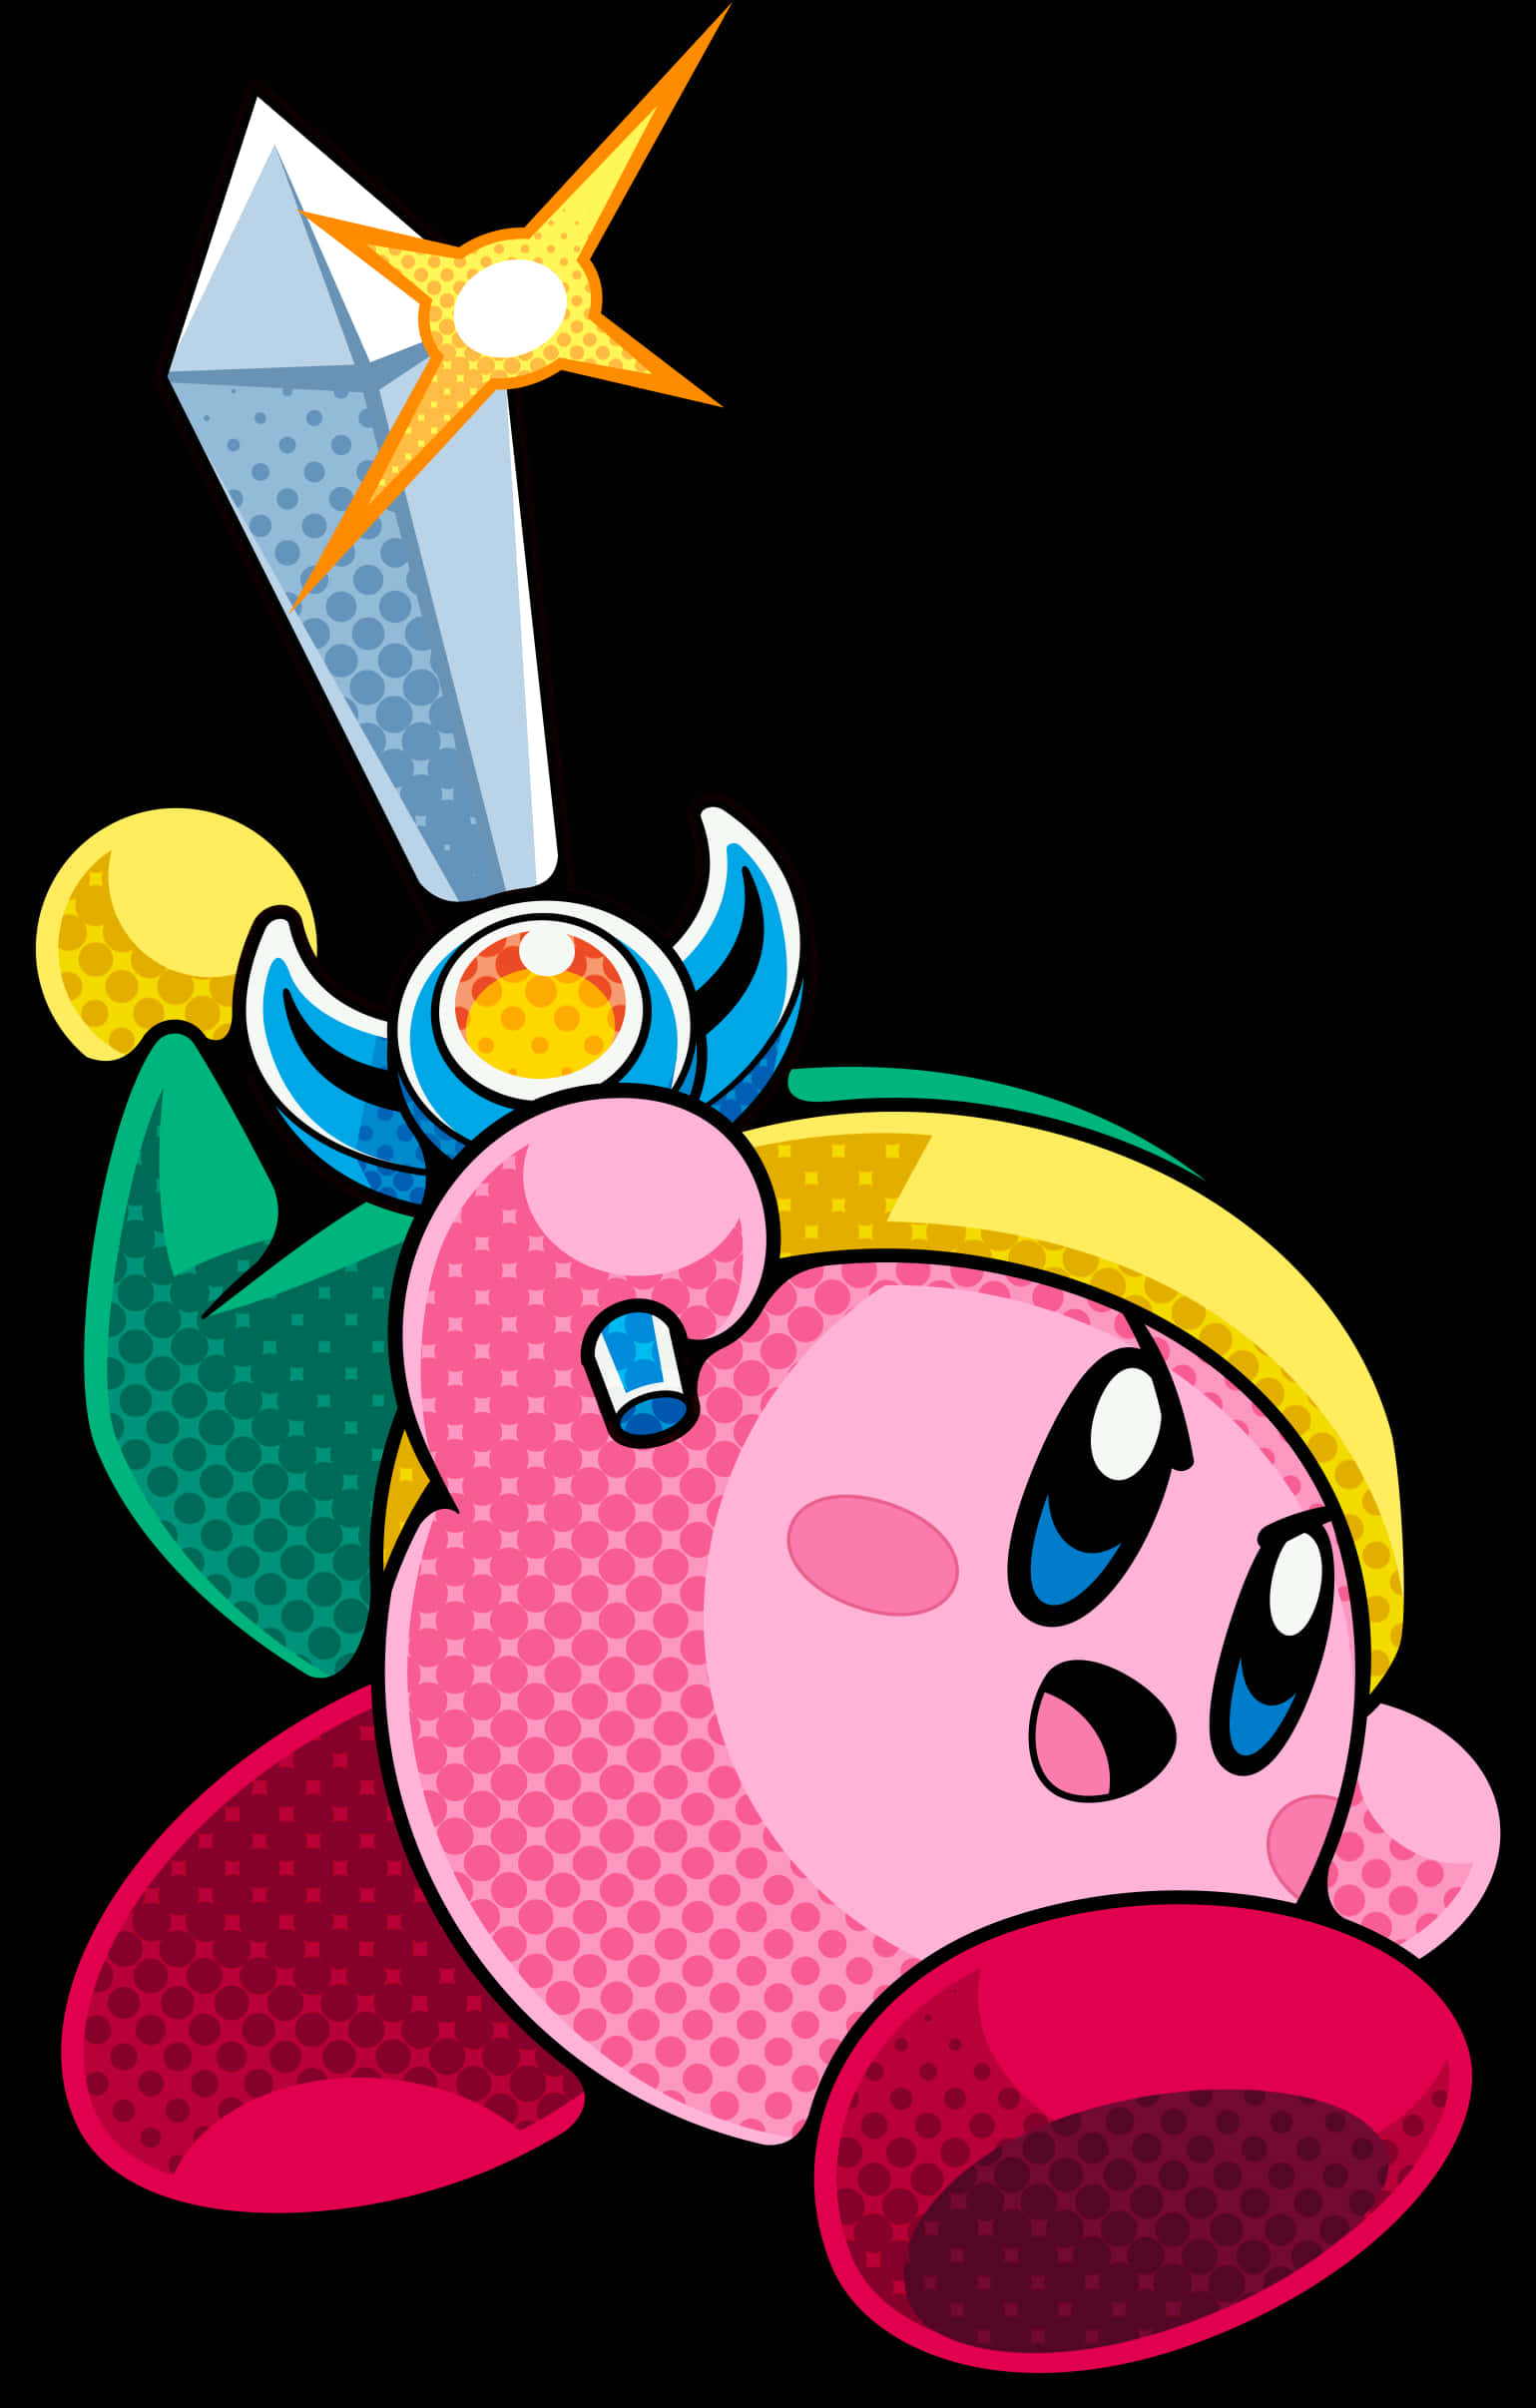 Kirby_with_ Sword_ Illustration PNG